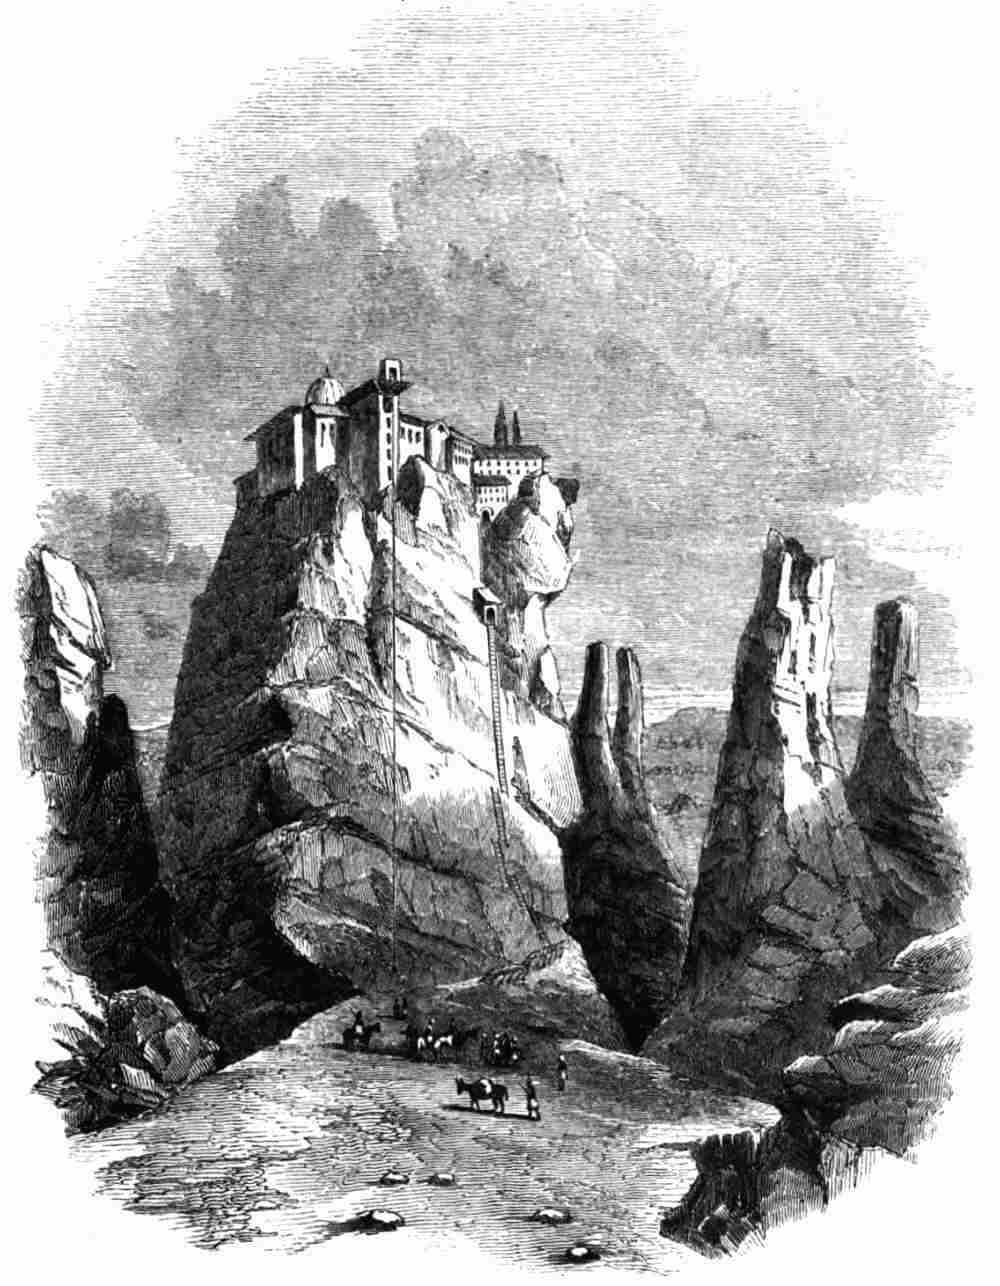 The Project Gutenberg eBook of Visits To Monasteries In The Levant, by Robert Curzon.